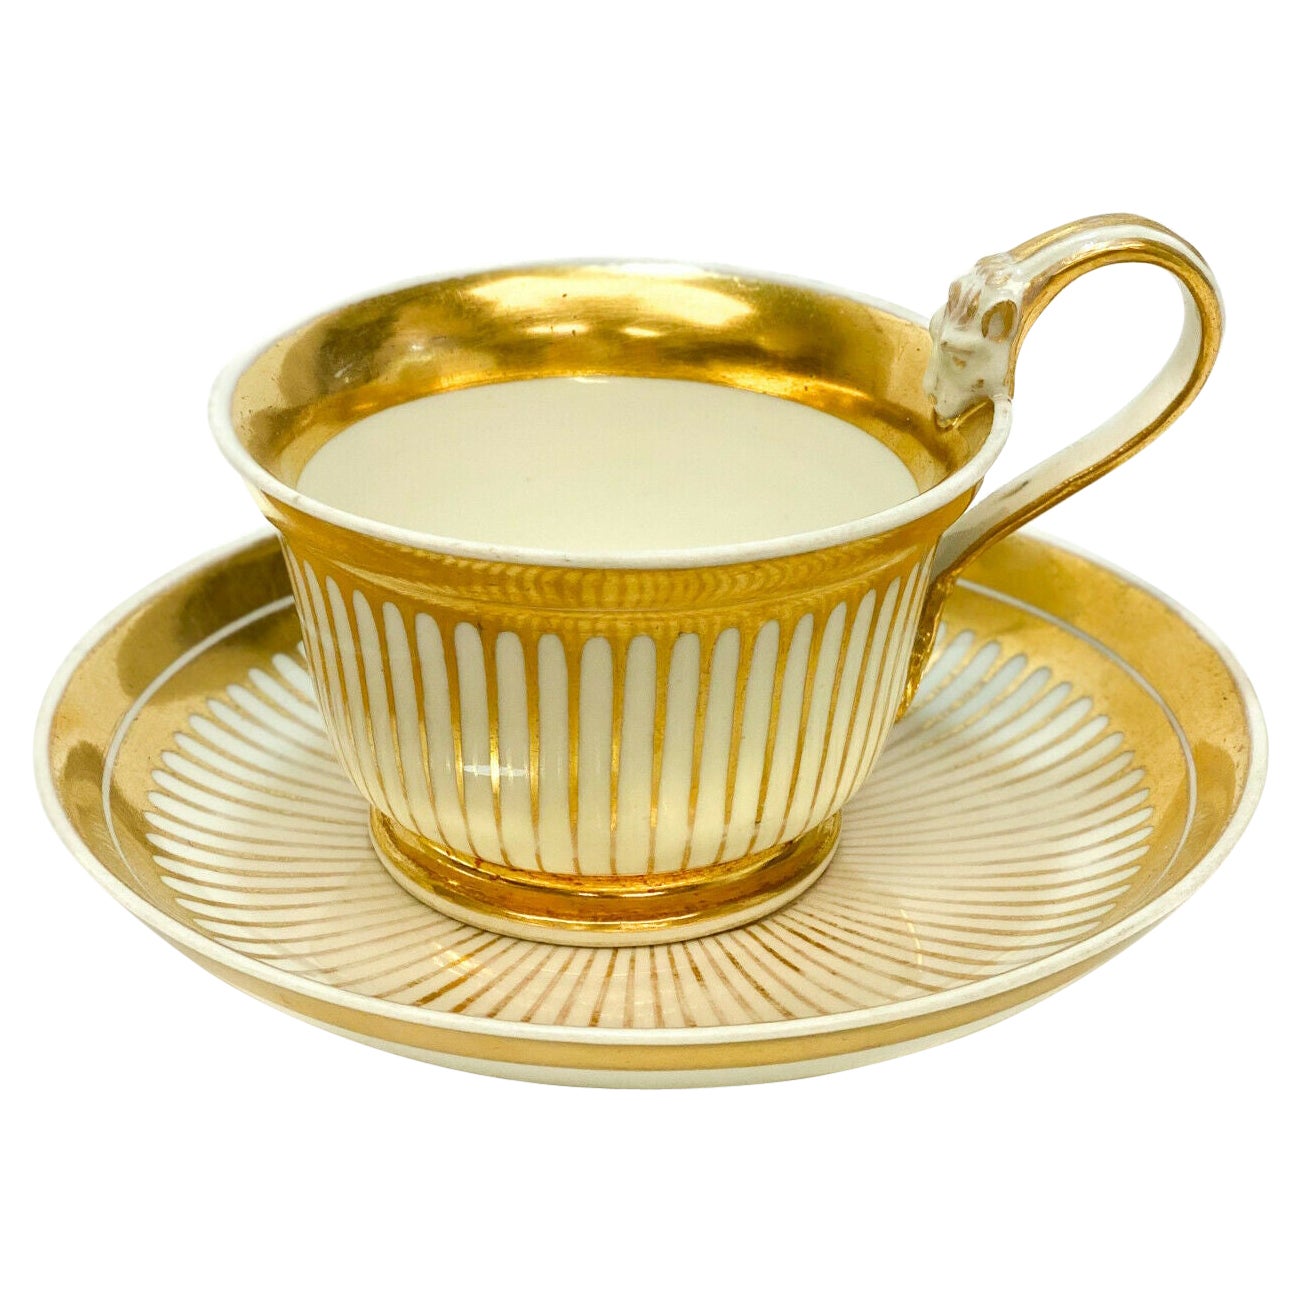 Imperial Royal Vienna Porcelain and Gilt Striped Cup & Saucer, 1821 For Sale